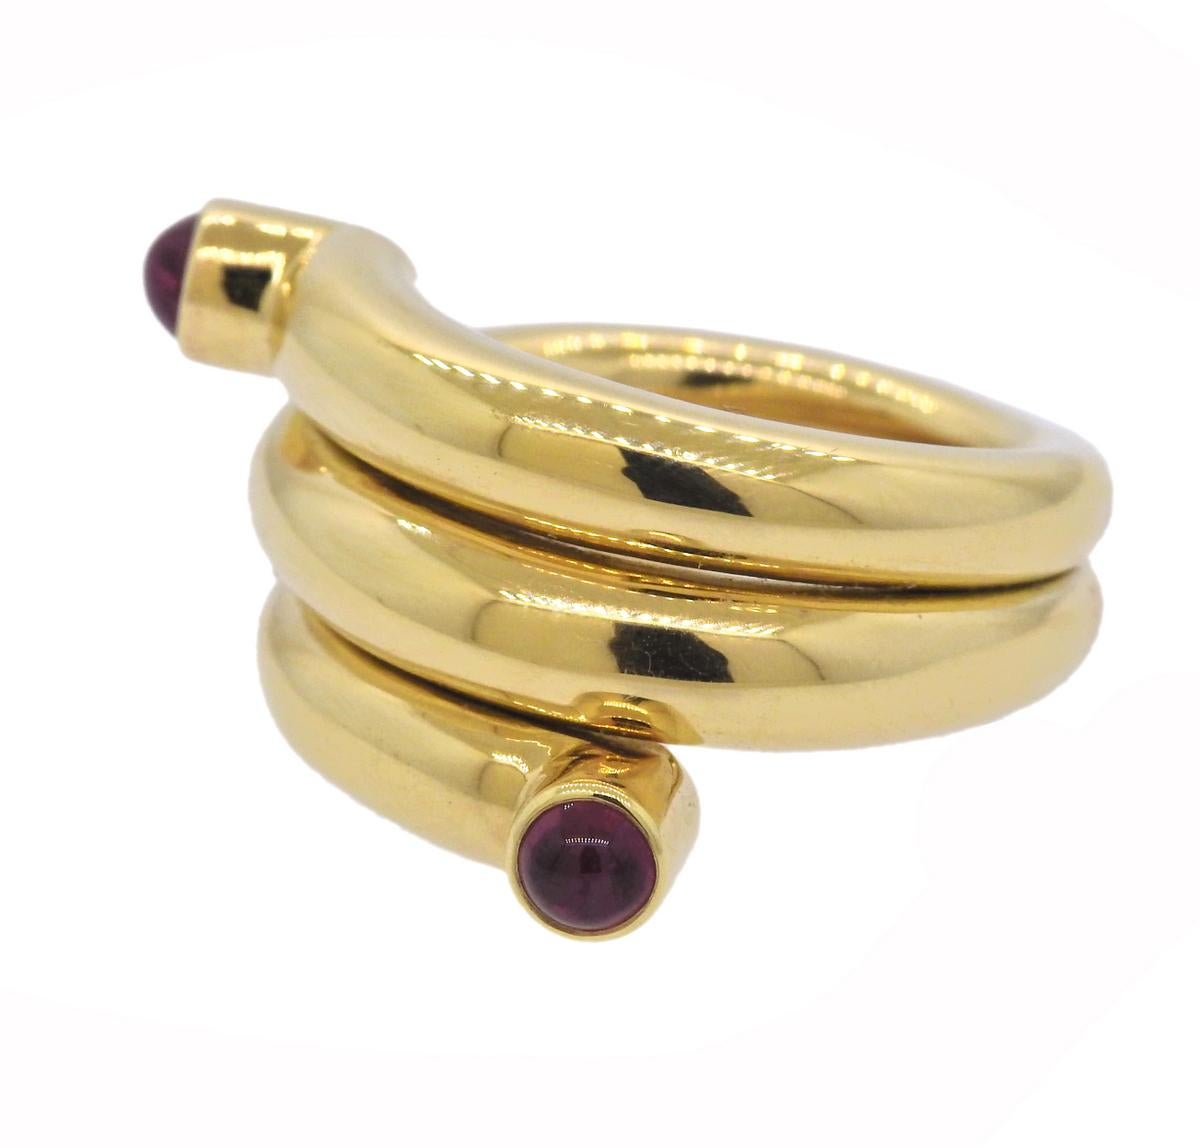 Tiffany & Co 18k gold wrap ring, crafted by Jean Schlumberger, set with two rubies. Ring size - 5.5, ring top is 14mm wide. Marked 750, Schlumberger, Tiffany & Co.